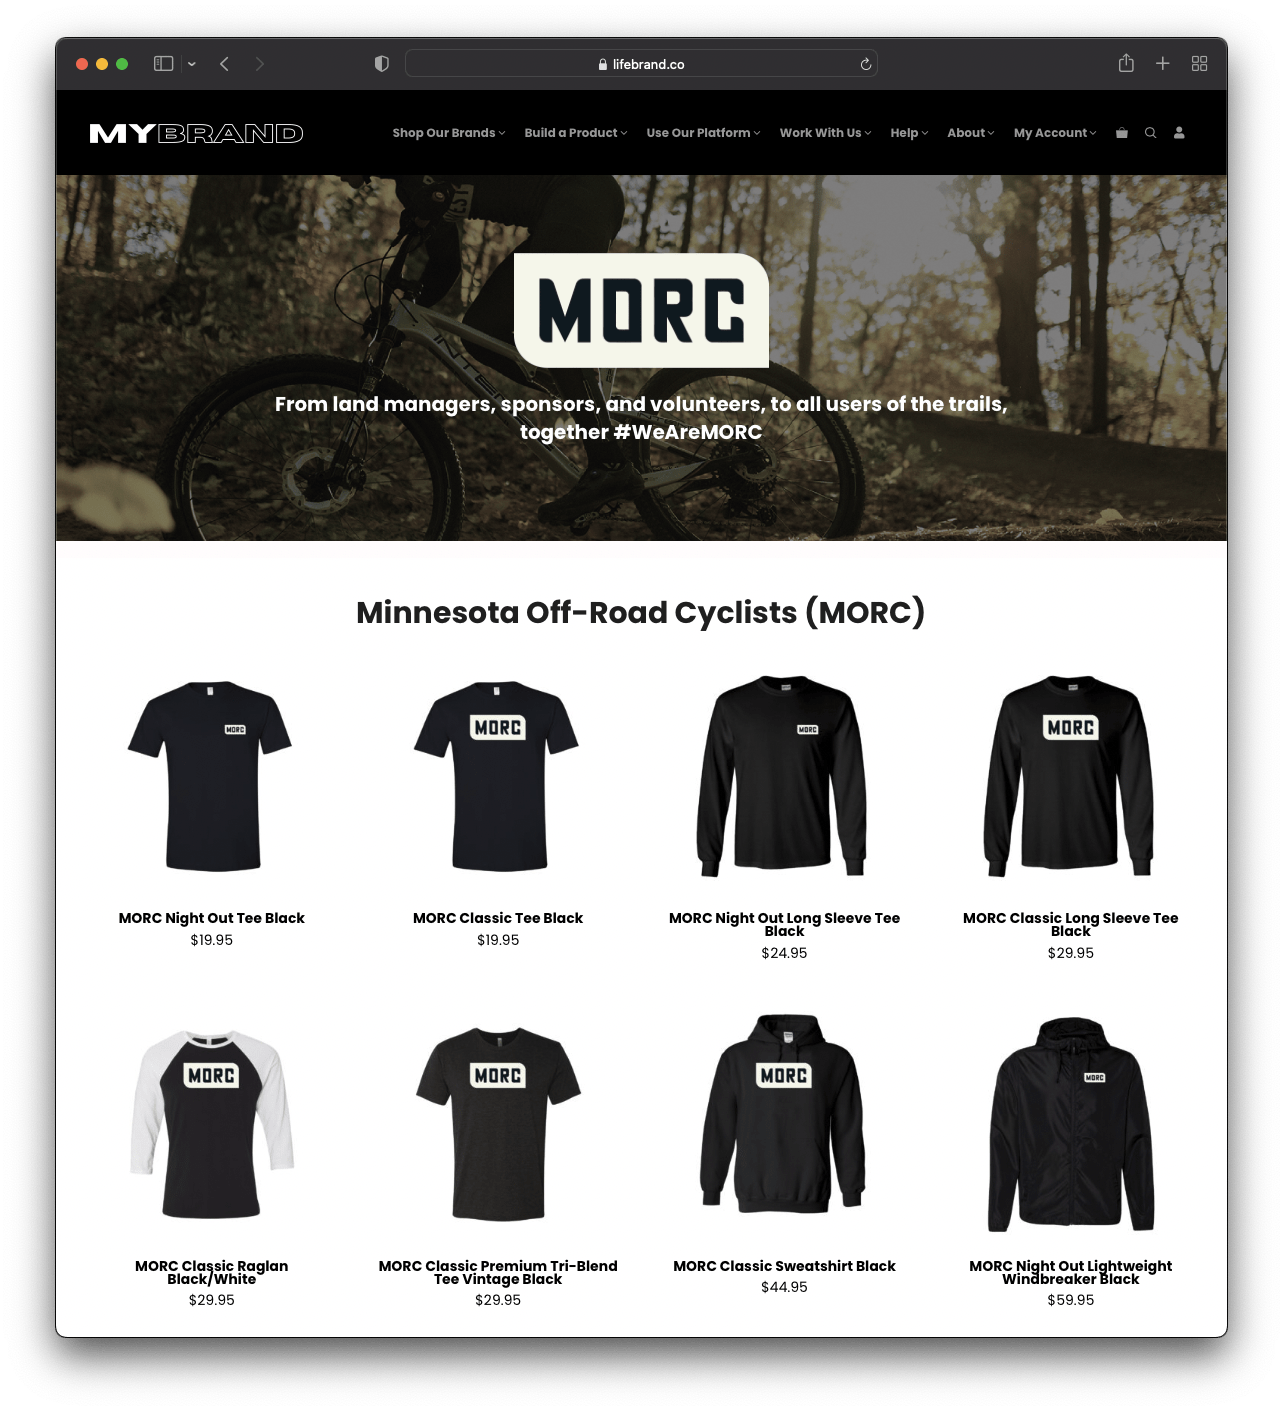 Minnesota Off Road Cyclists (MORC) uses My Brand to automate their apparel needs, and your trails can too... For free.